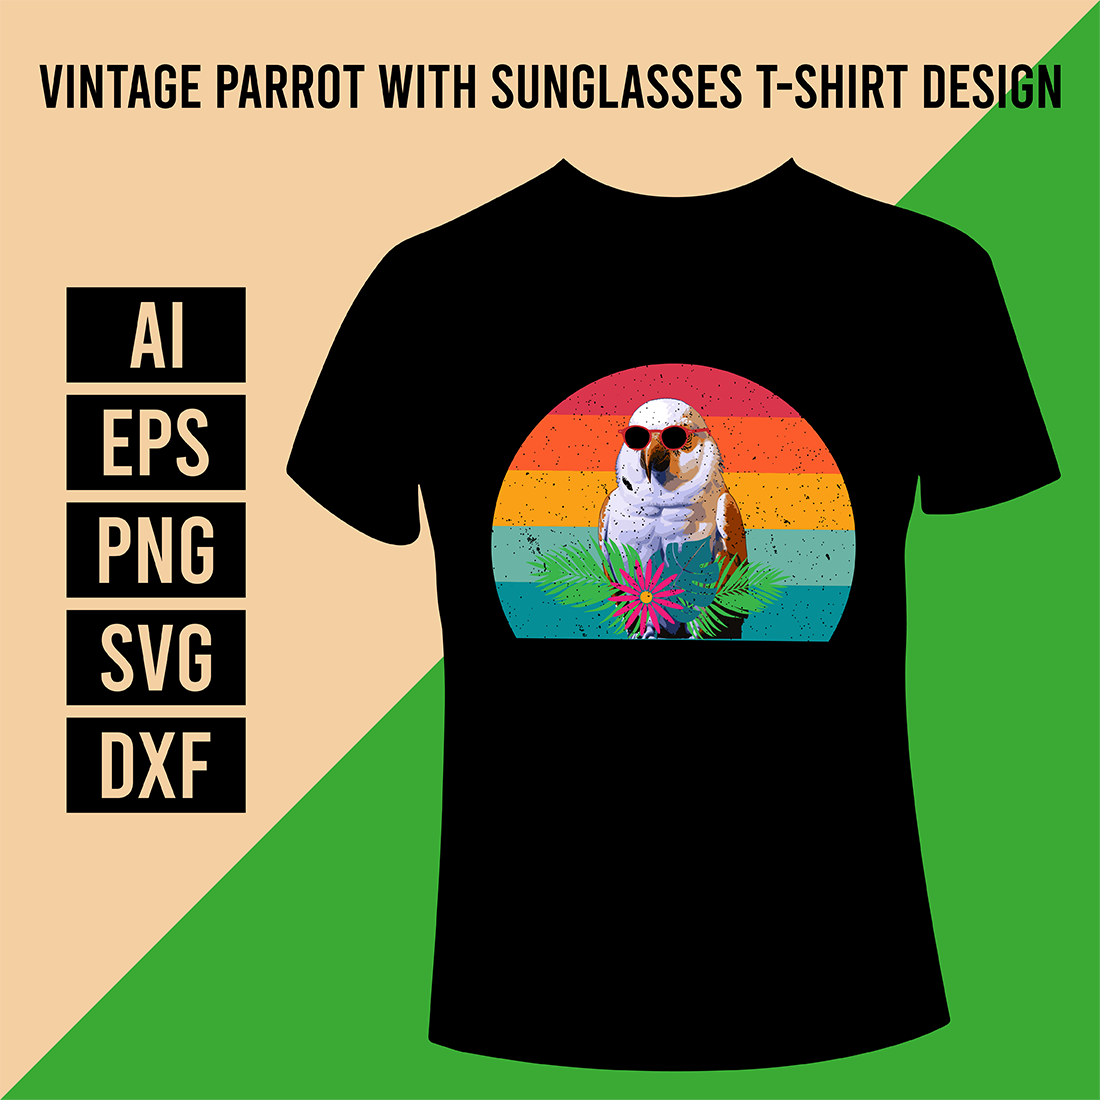 Vintage Parrot with Sunglasses T-Shirt Design cover image.